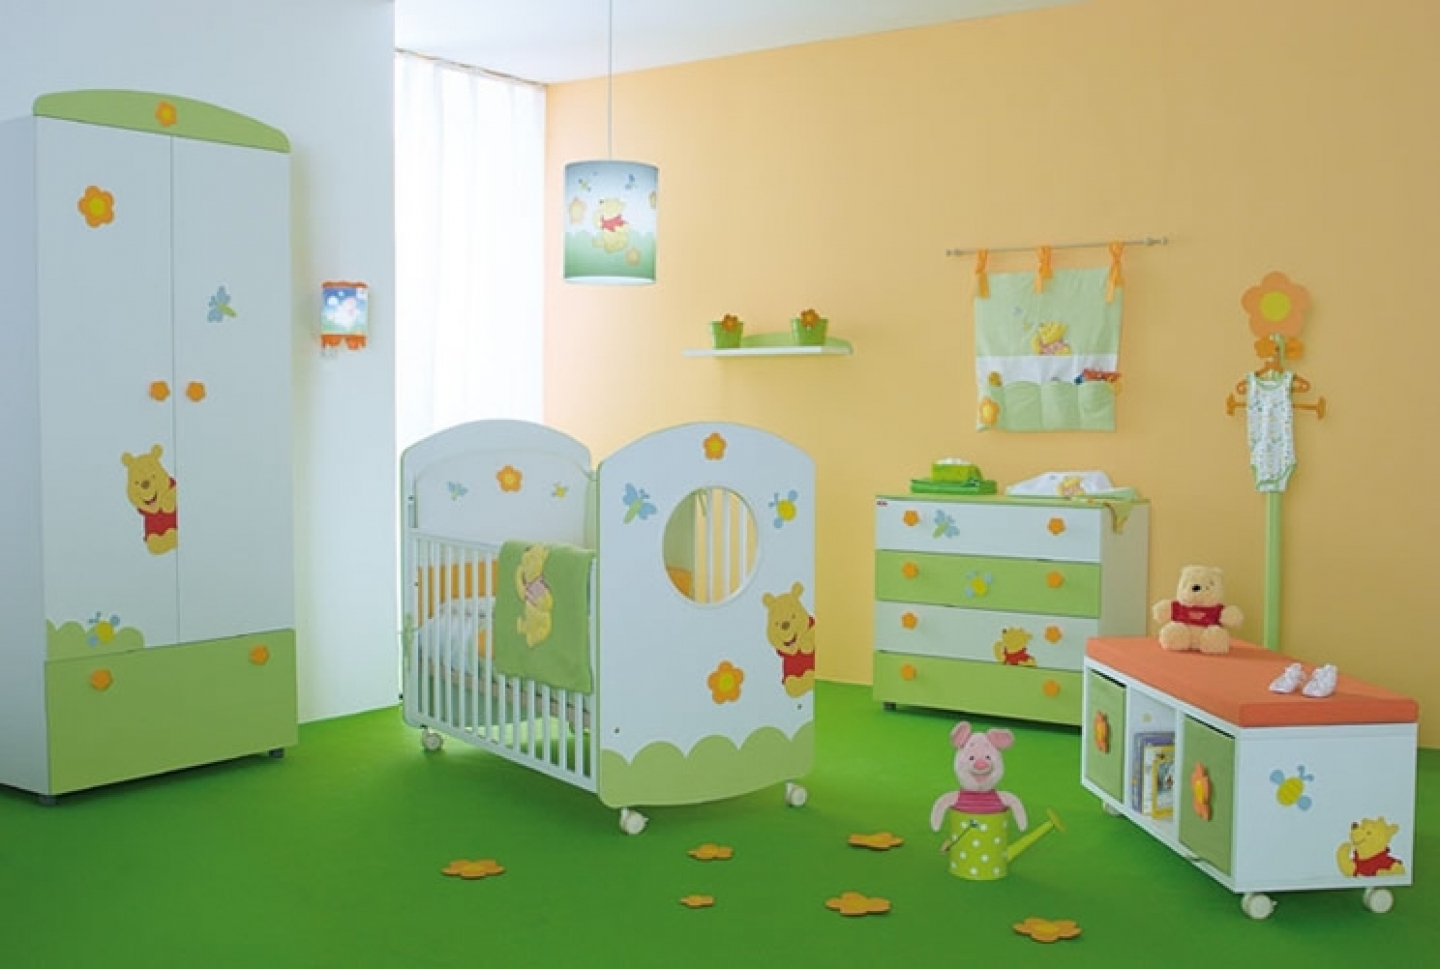 baby room wallpaper,product,room,nursery,furniture,infant bed